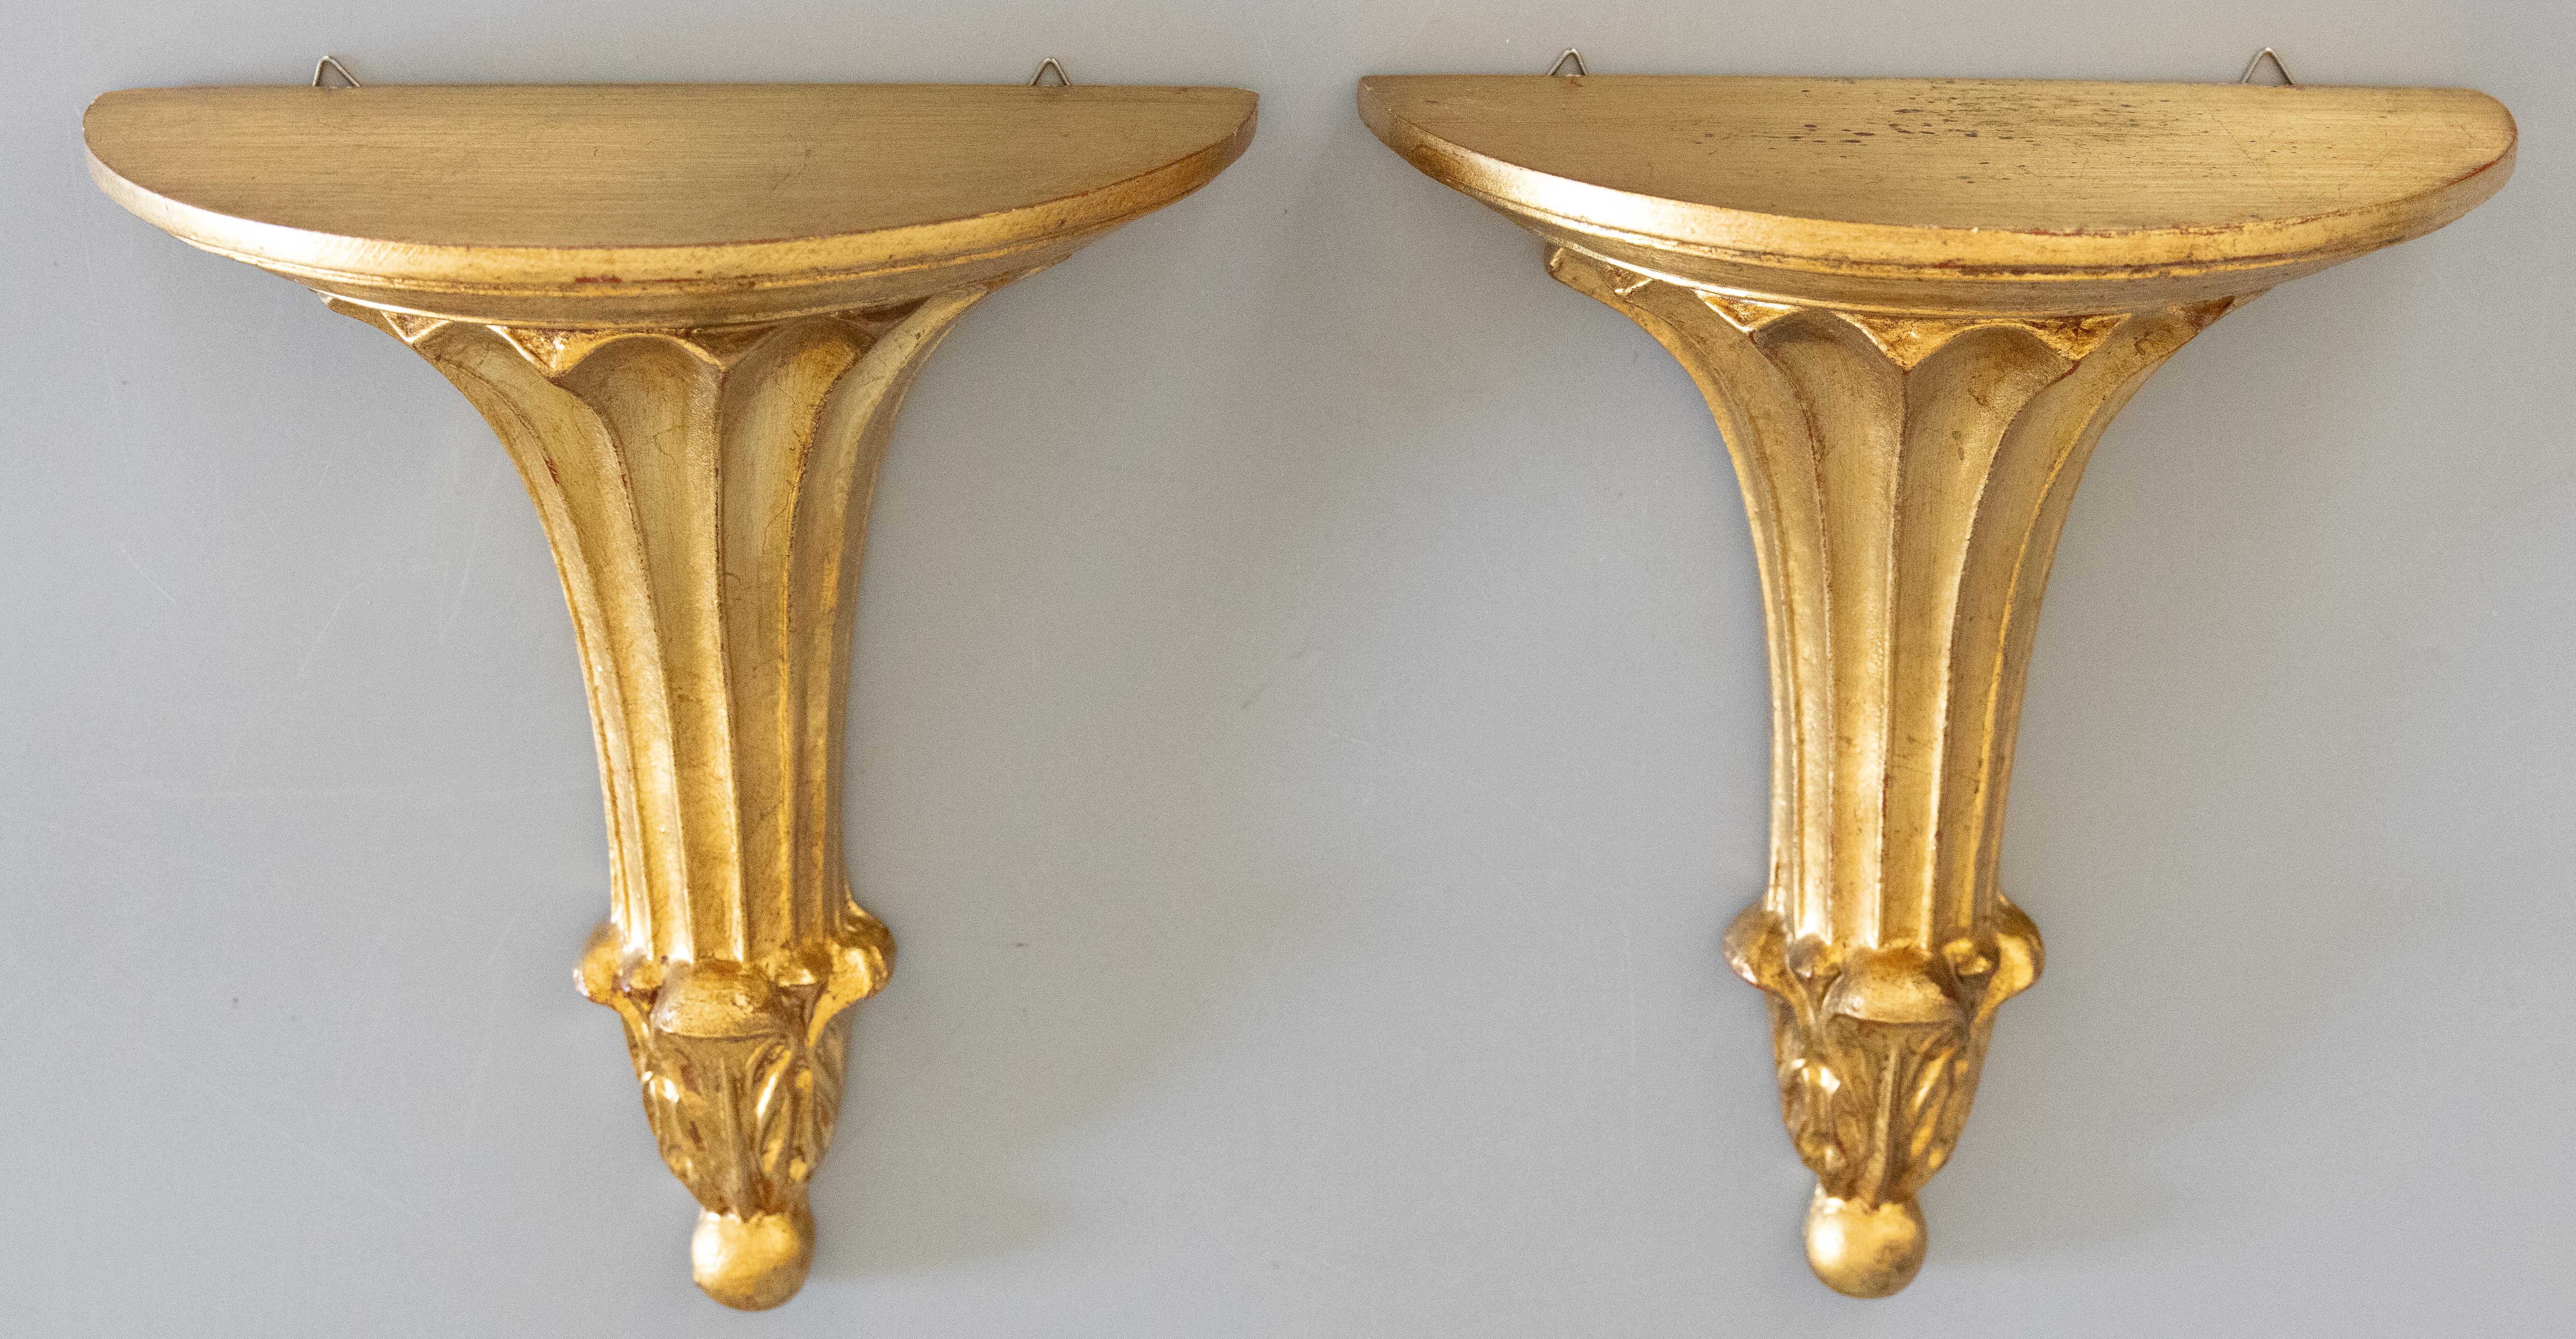 Pair of Mid-20th Century Italian Neoclassical Giltwood Wall Brackets Shelves 2